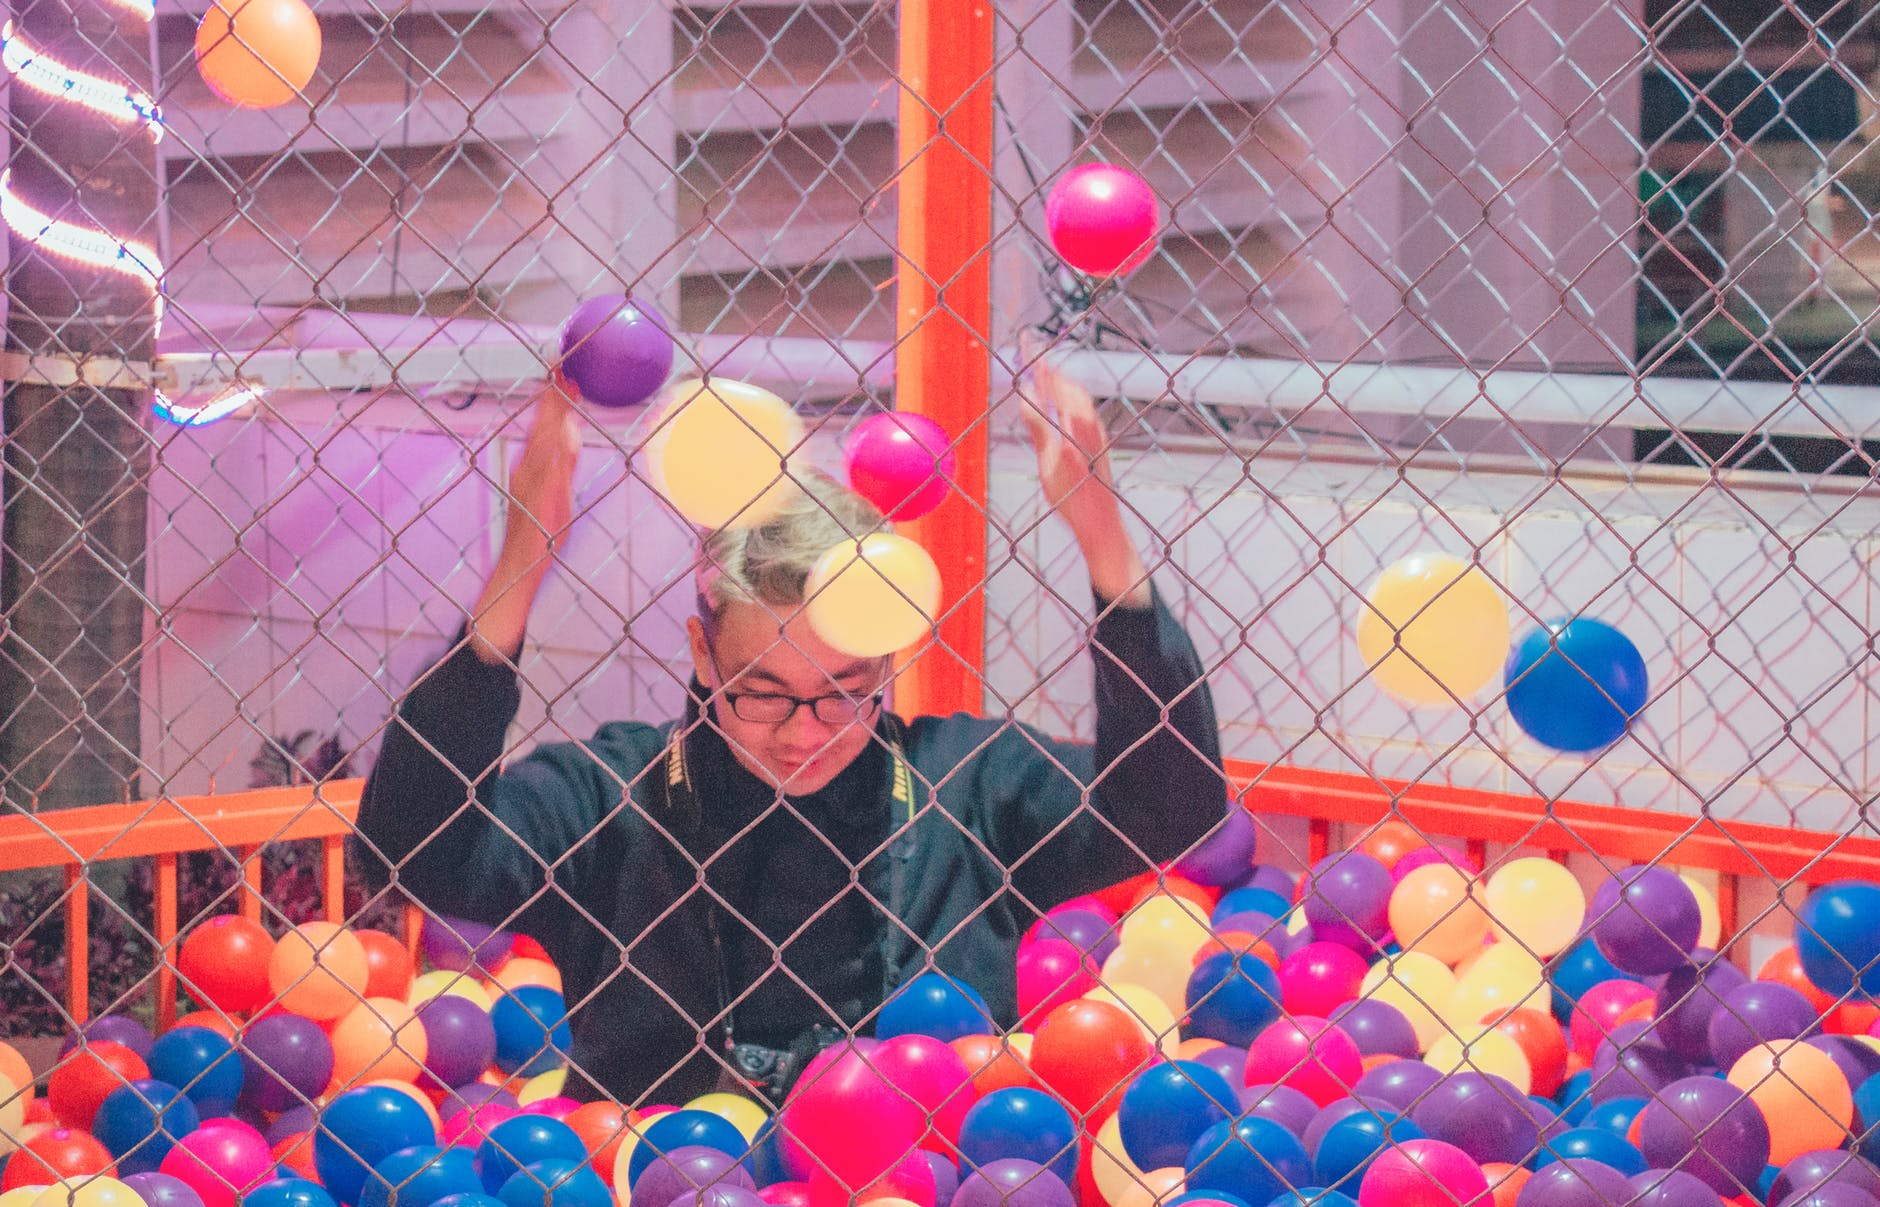 Man in Ball Pit, Man in Ball Pit